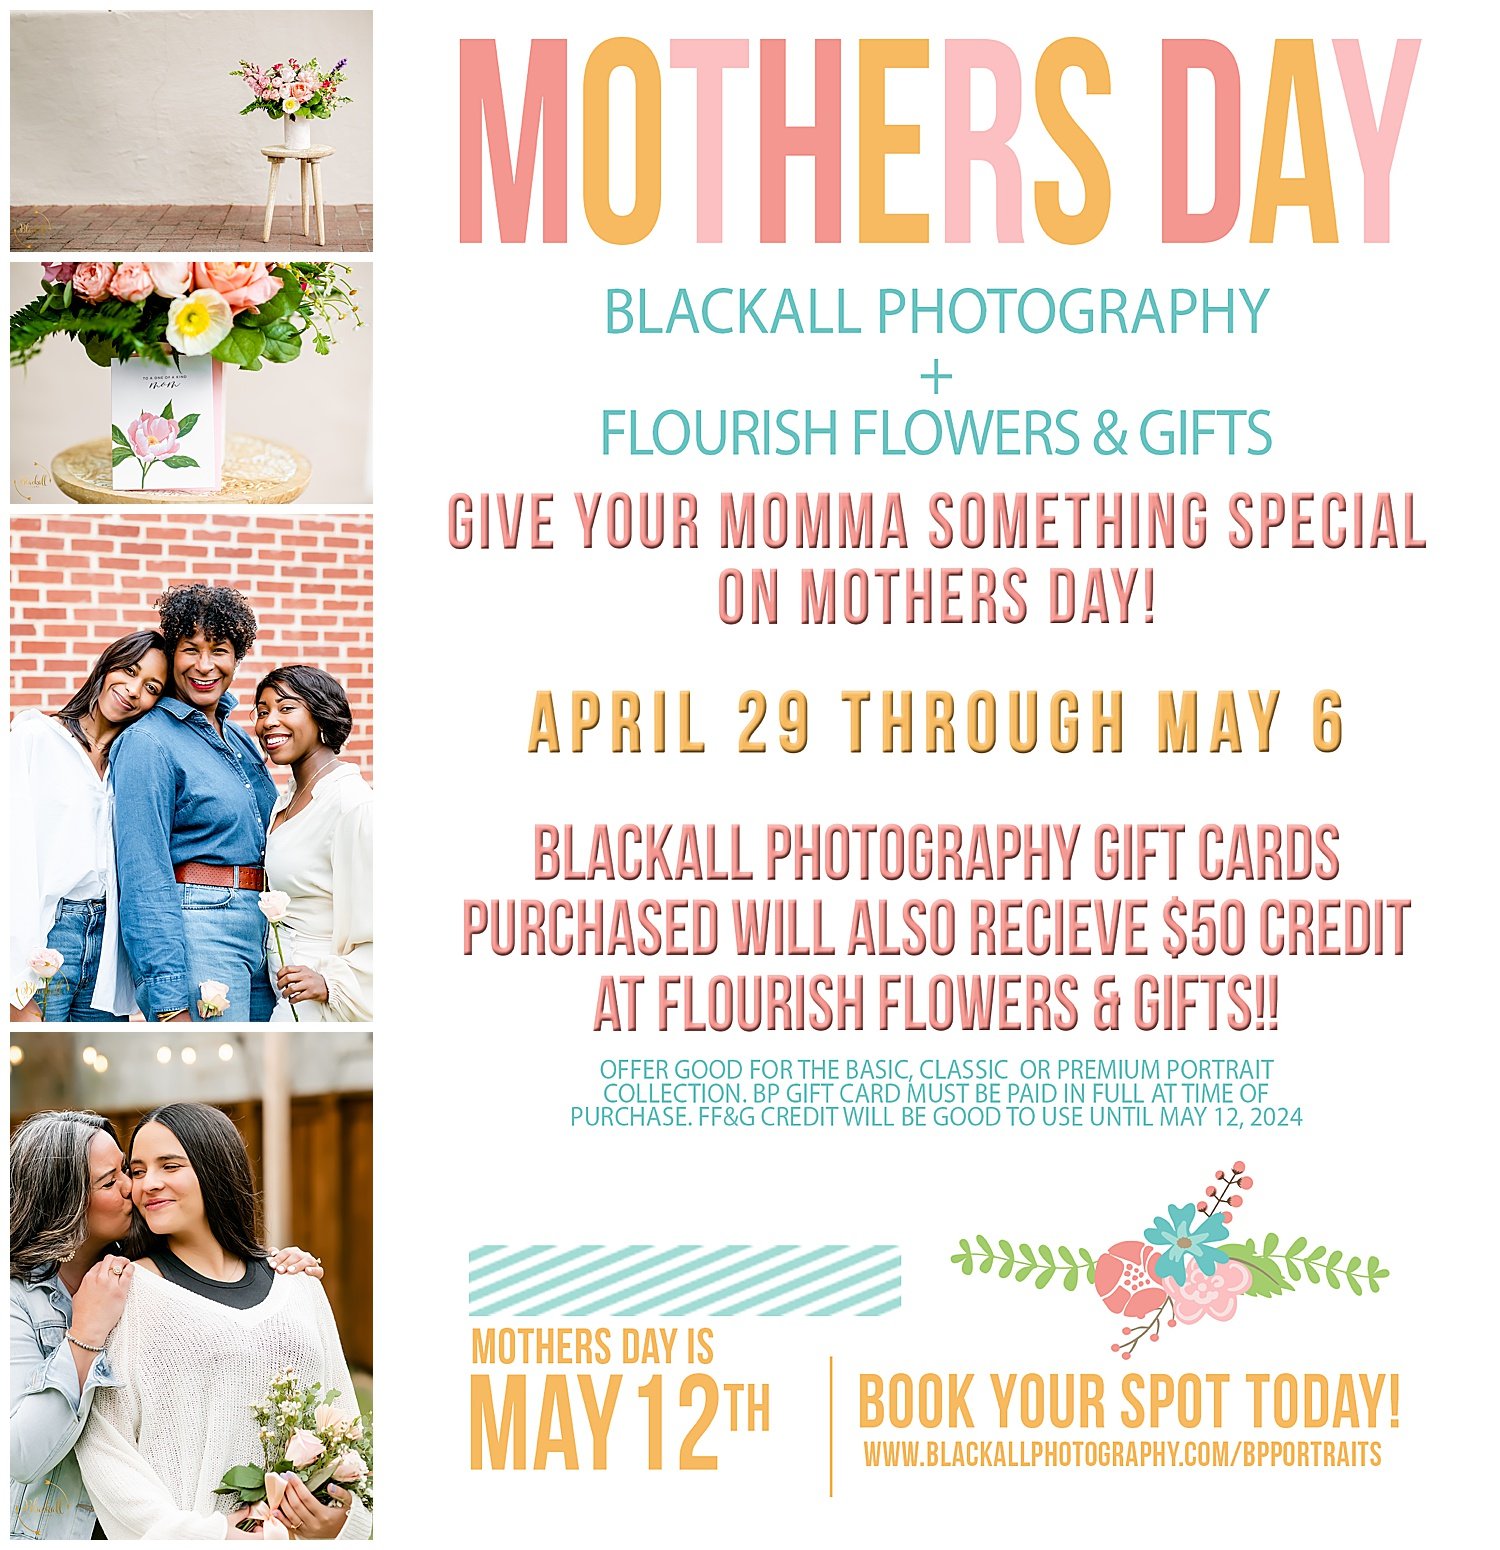 APRIL 29- MAY 6 ONLY:: Photos &amp; Florals... yes please! Make momma sooooo happy this year with a beautiful bouquet she can have on Mother's Day 🌷and beautiful imgery of her family that will last lifetimes📸

Any @BlackallPhotography gift card pur